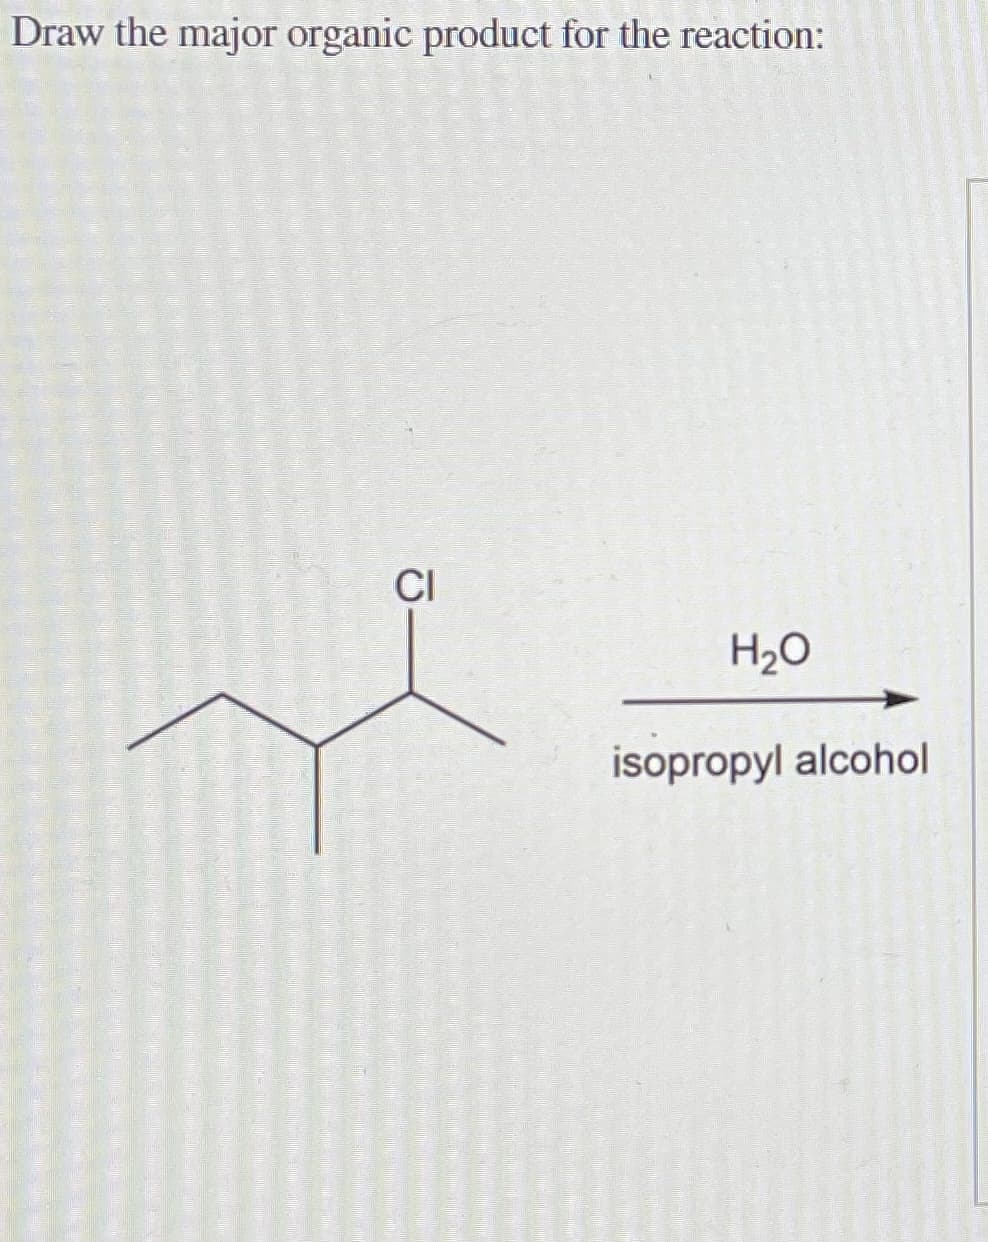 Draw the major organic product for the reaction:
CI
H2O
isopropyl alcohol
